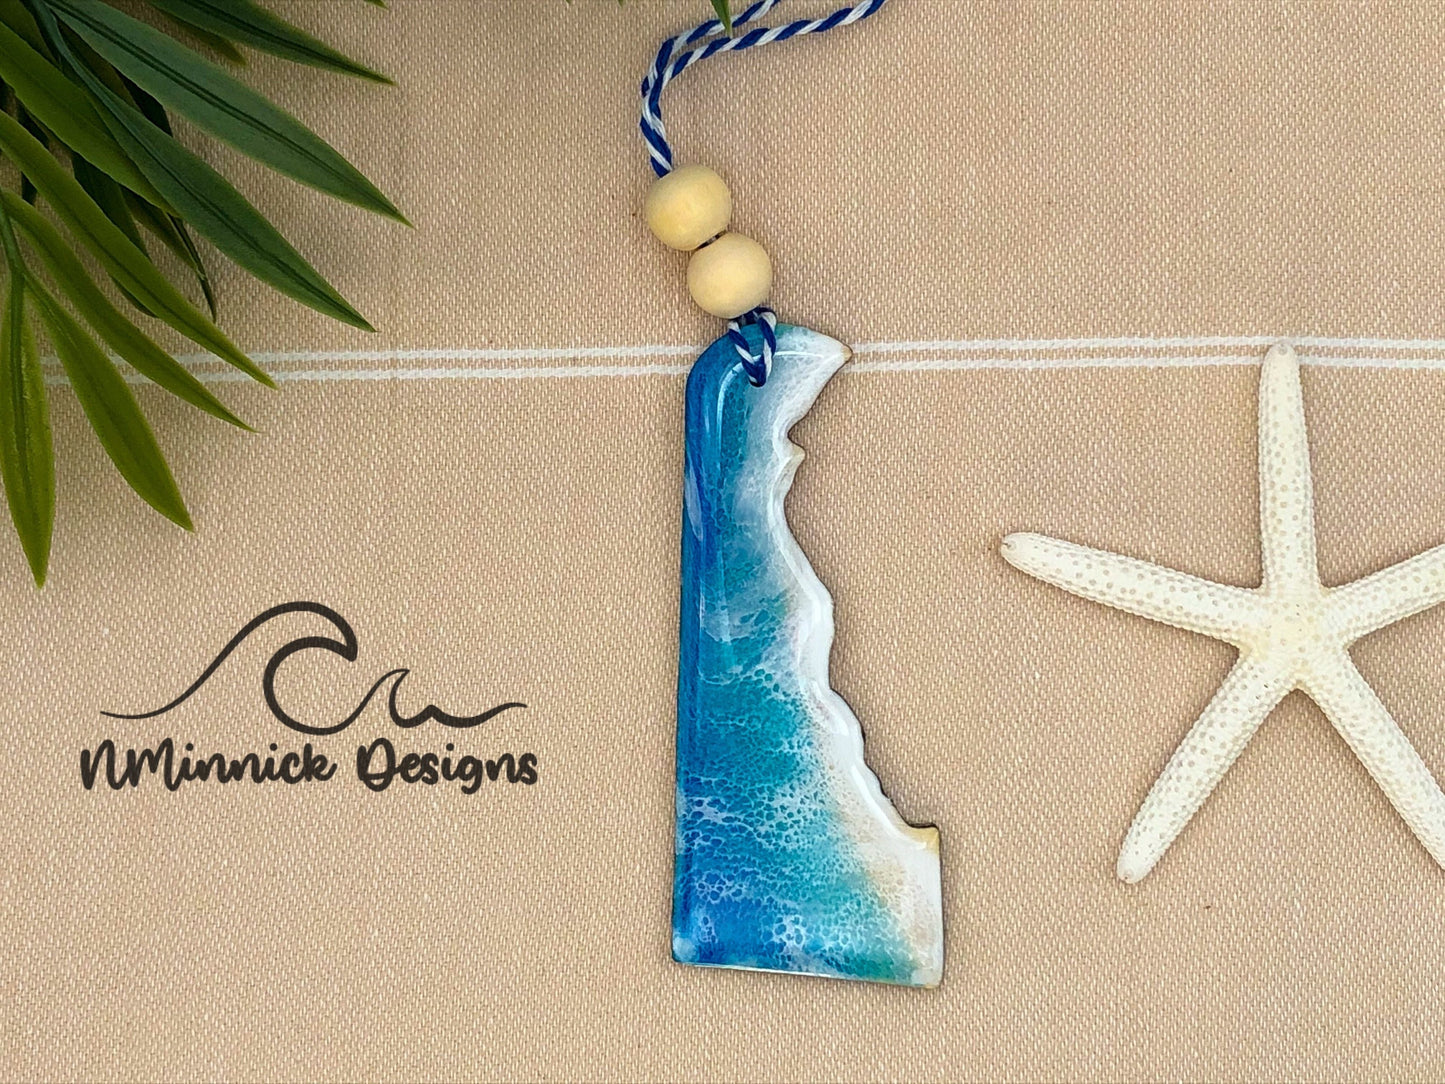 Delaware shaped wood ornament covered in blue, teal, and white resin to create a one of a kind beach scene. Approx. 4 inches long and finished with bakers twine and two wooden beads.